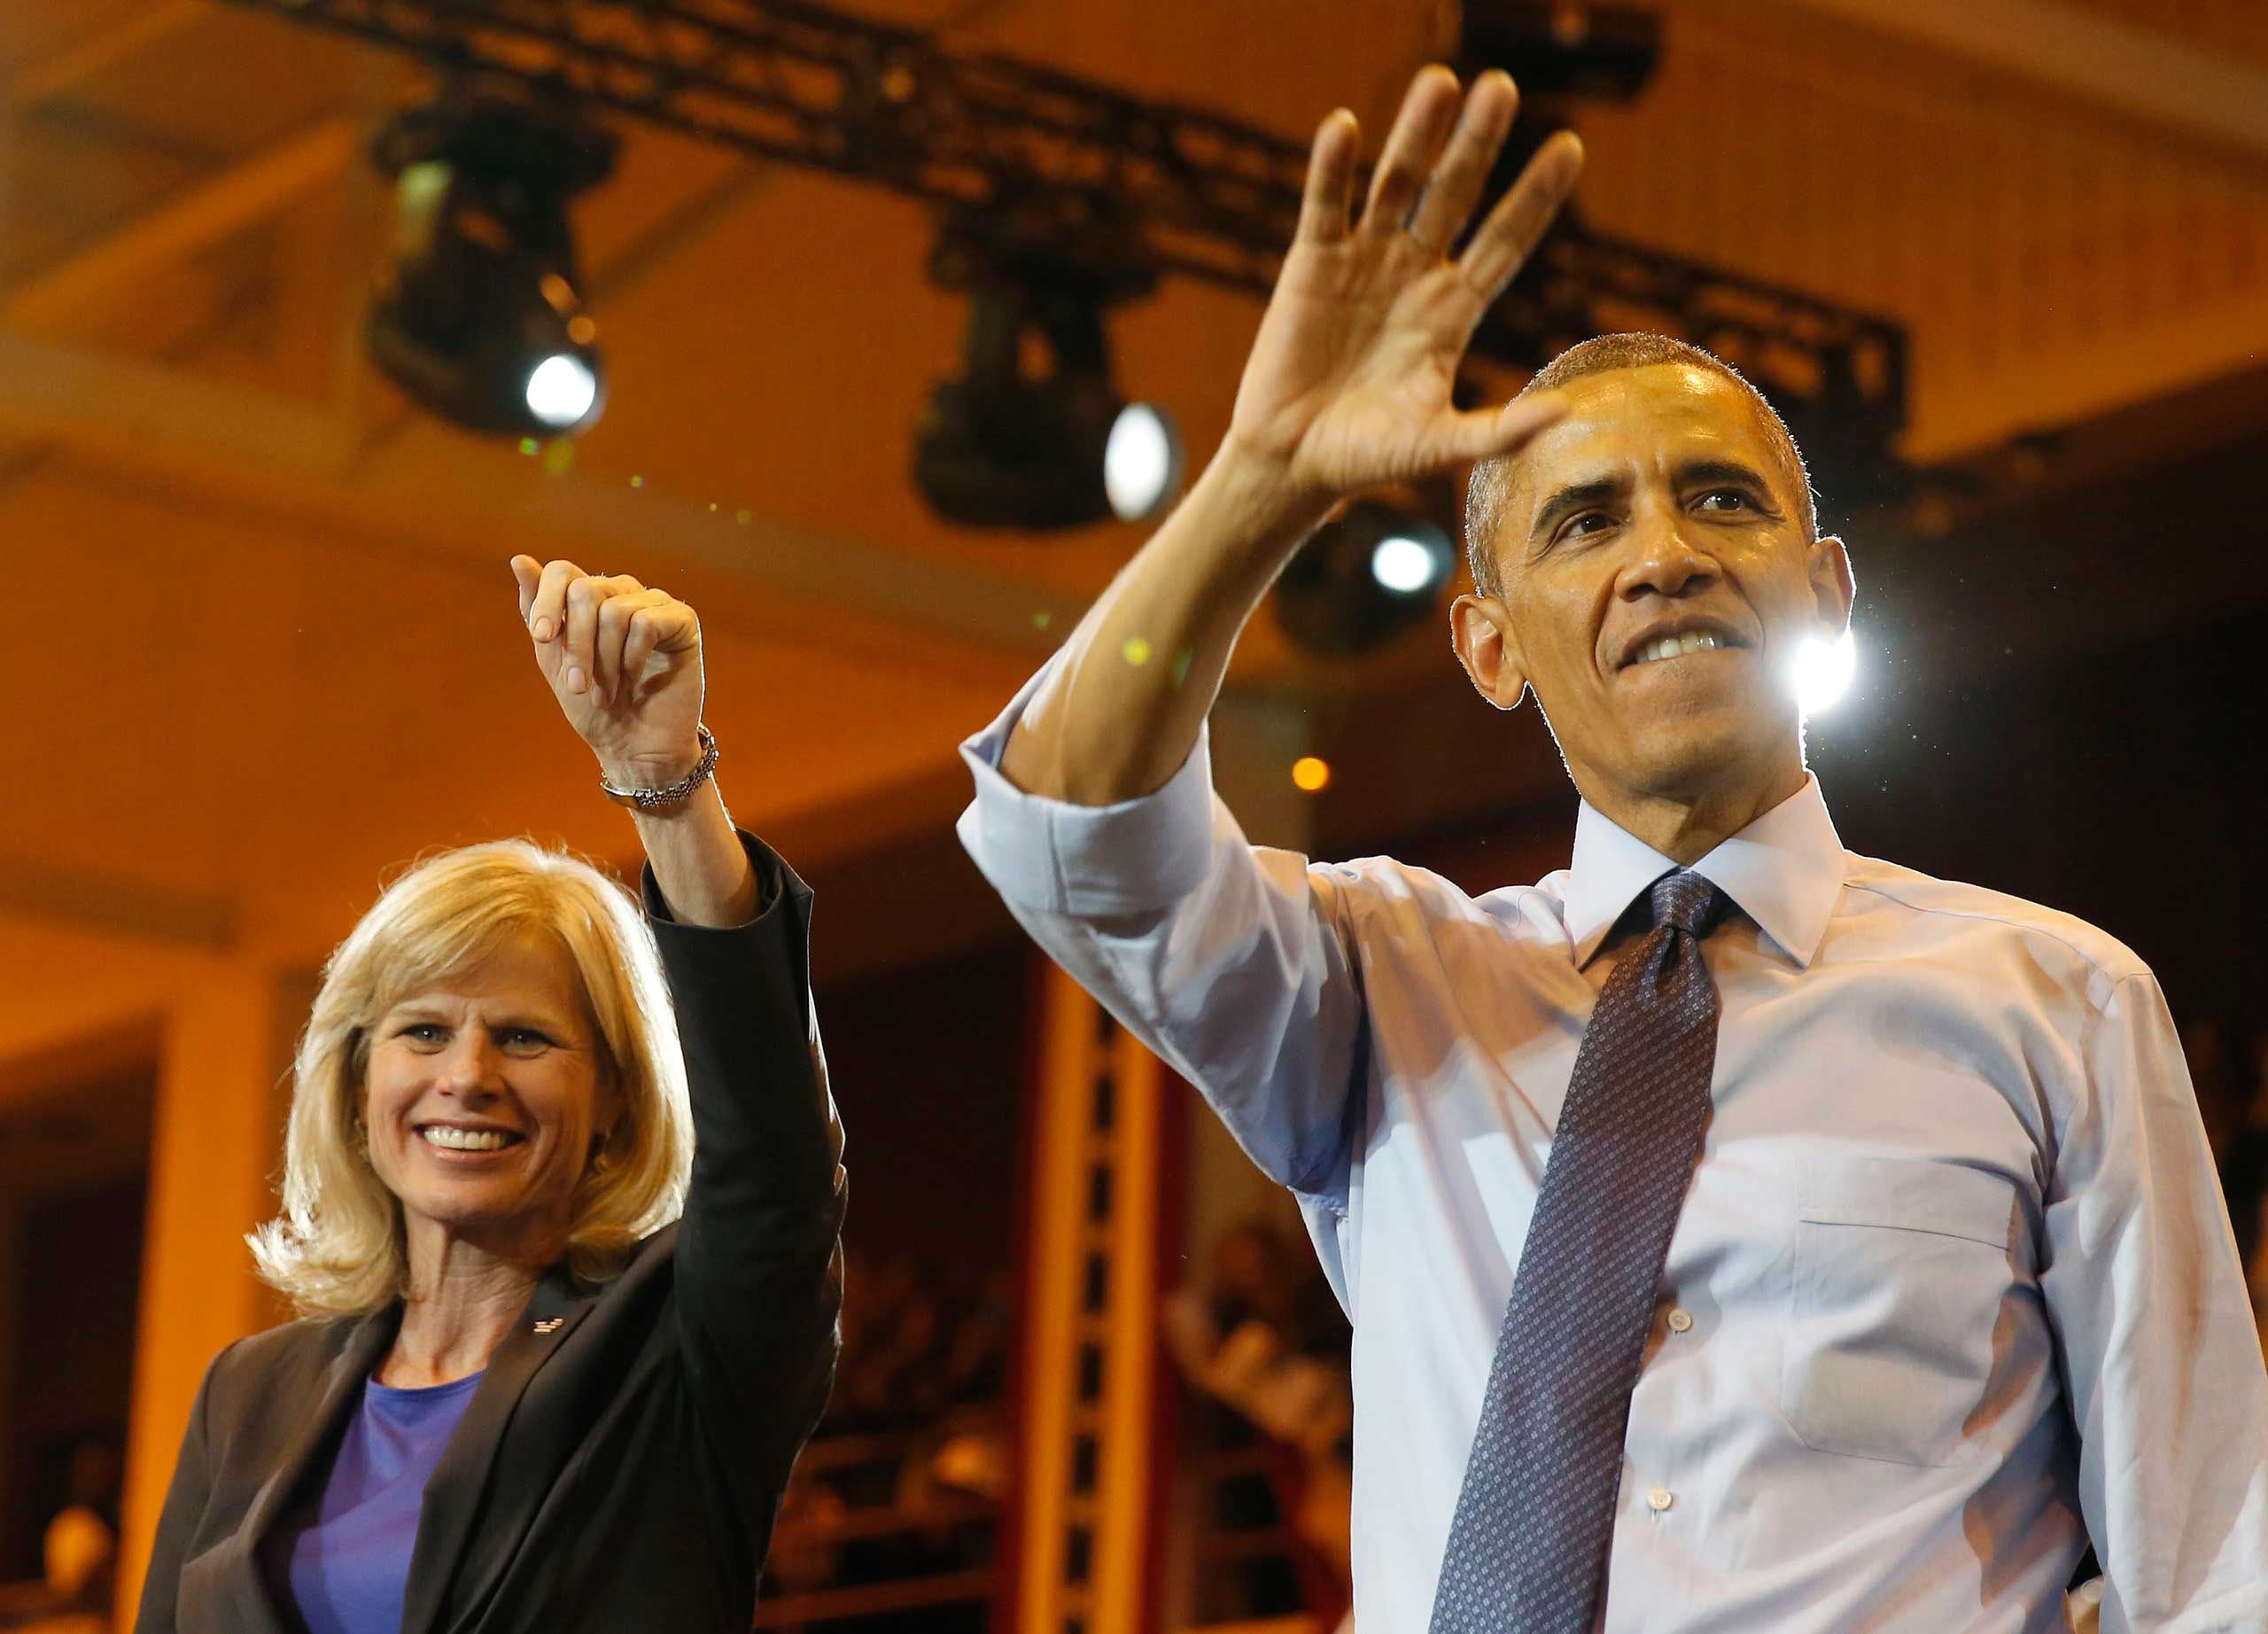 U.S. President Barack Obama attends a campaign event with Democratic candidate for Wisconsin Gov. Mary Burke while at North Division High School in Milwaukee